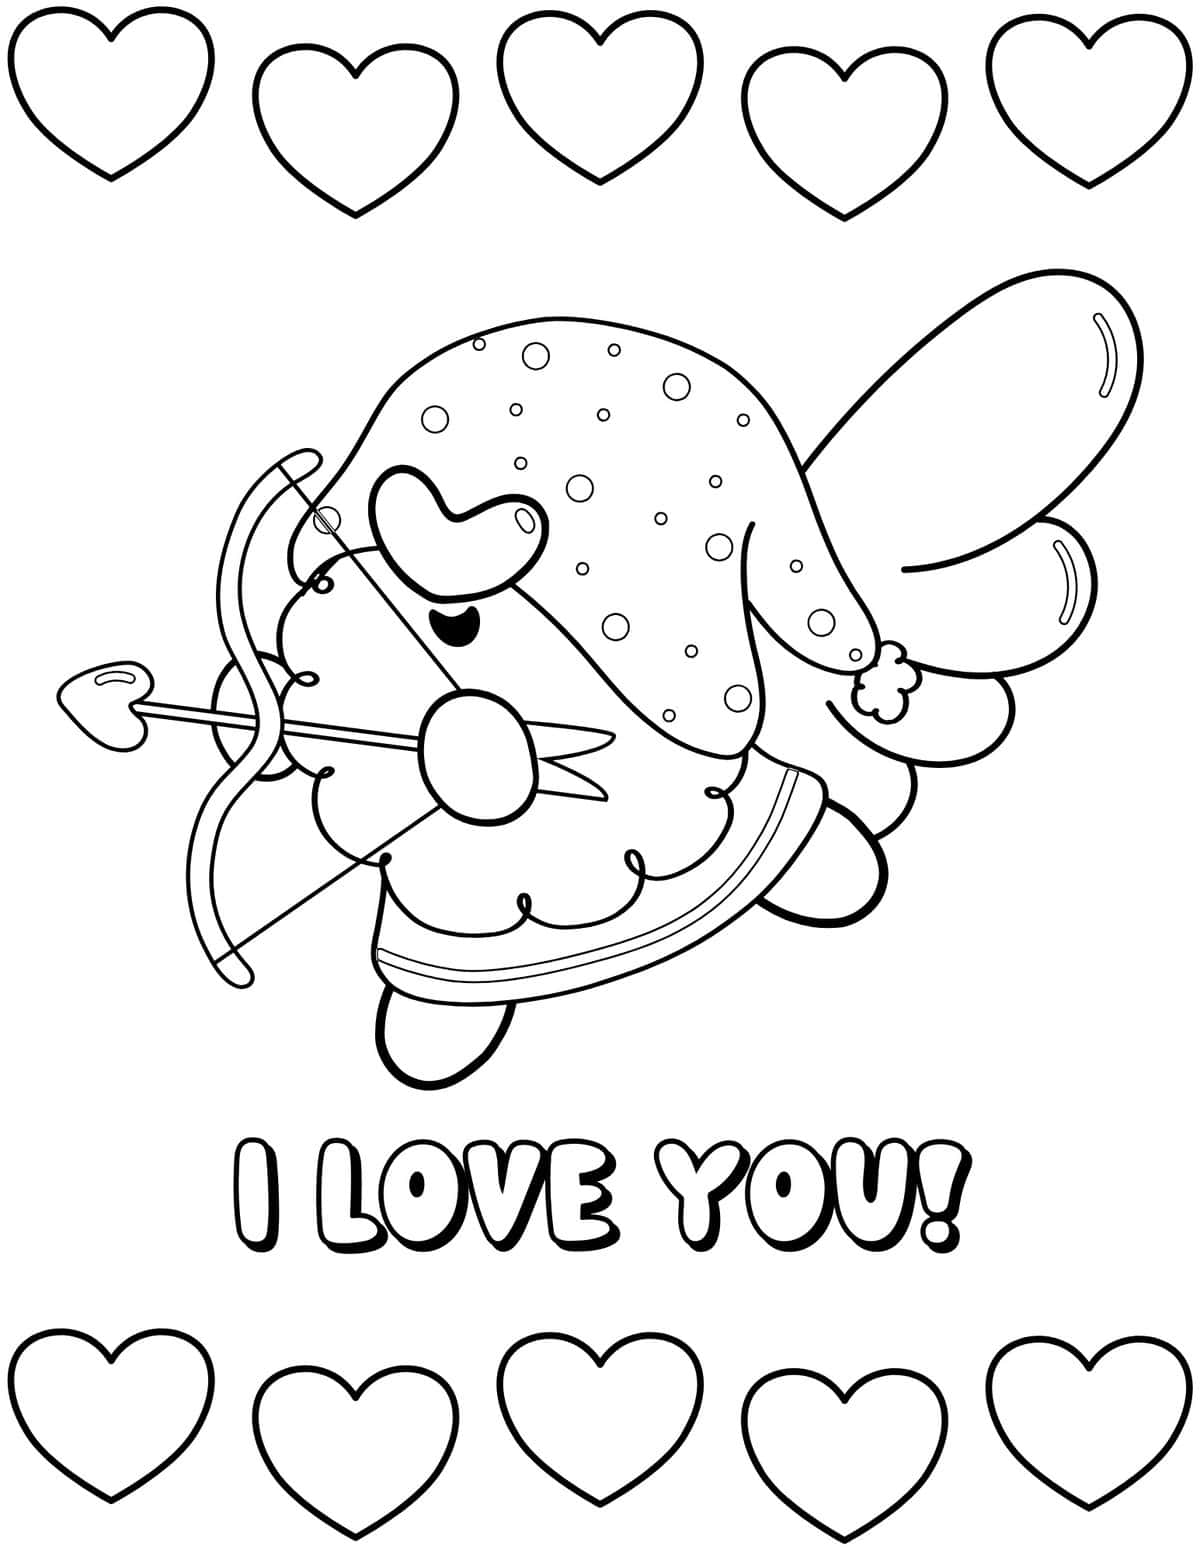 I love you Valentine's Day gnome coloring page